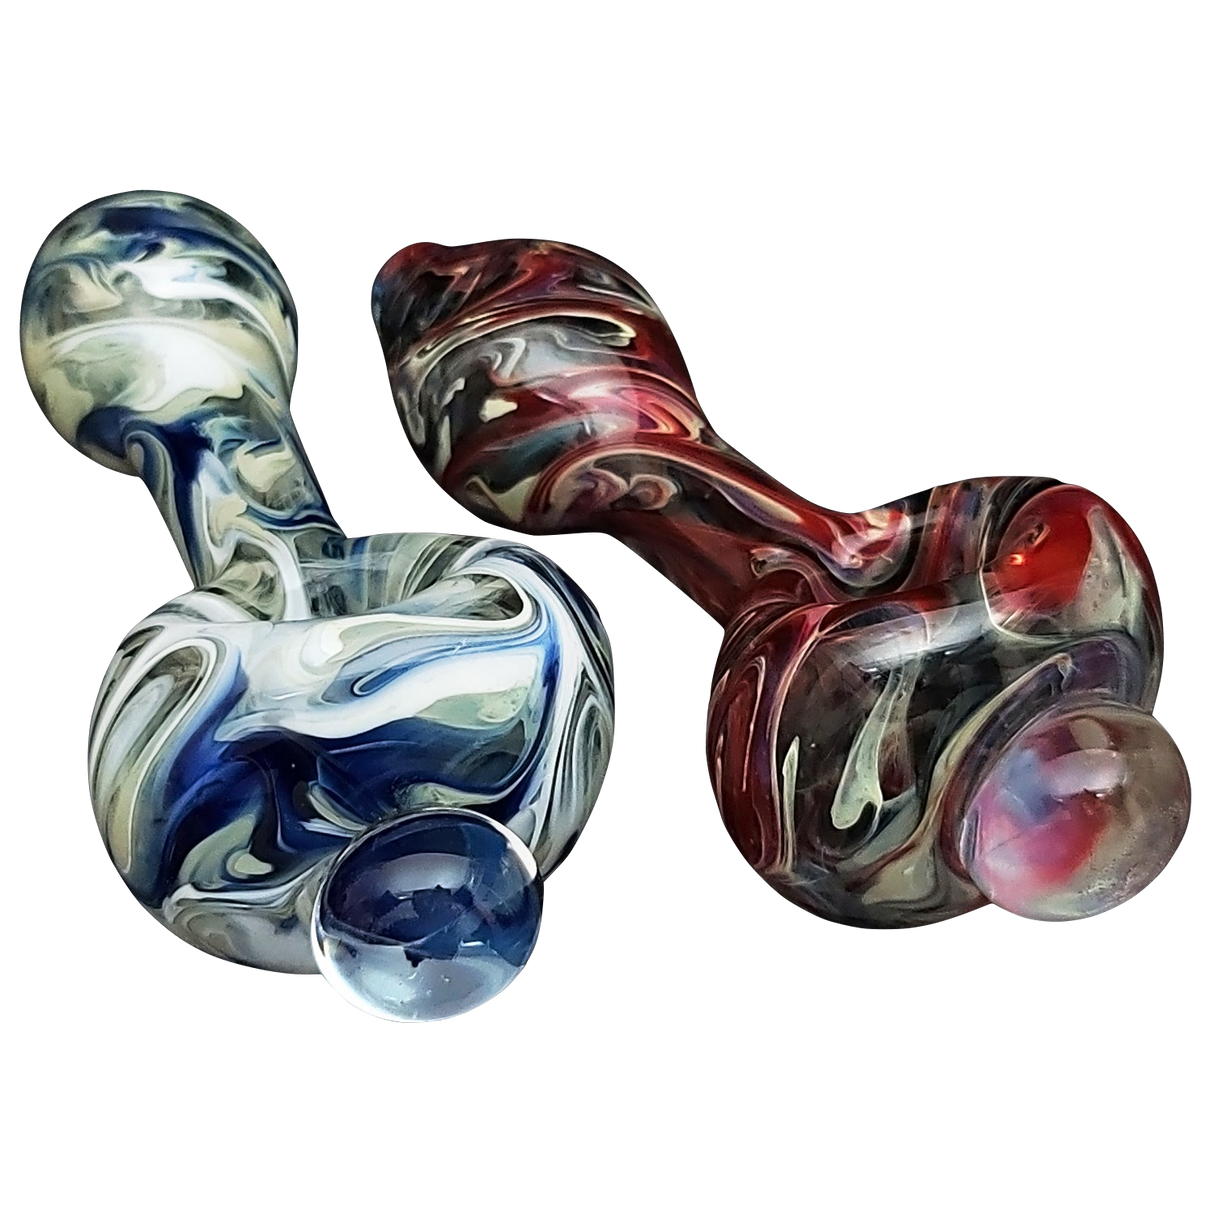 LA Pipes HP2 Spoon hand pipes in swirl design, borosilicate glass, side view on white background